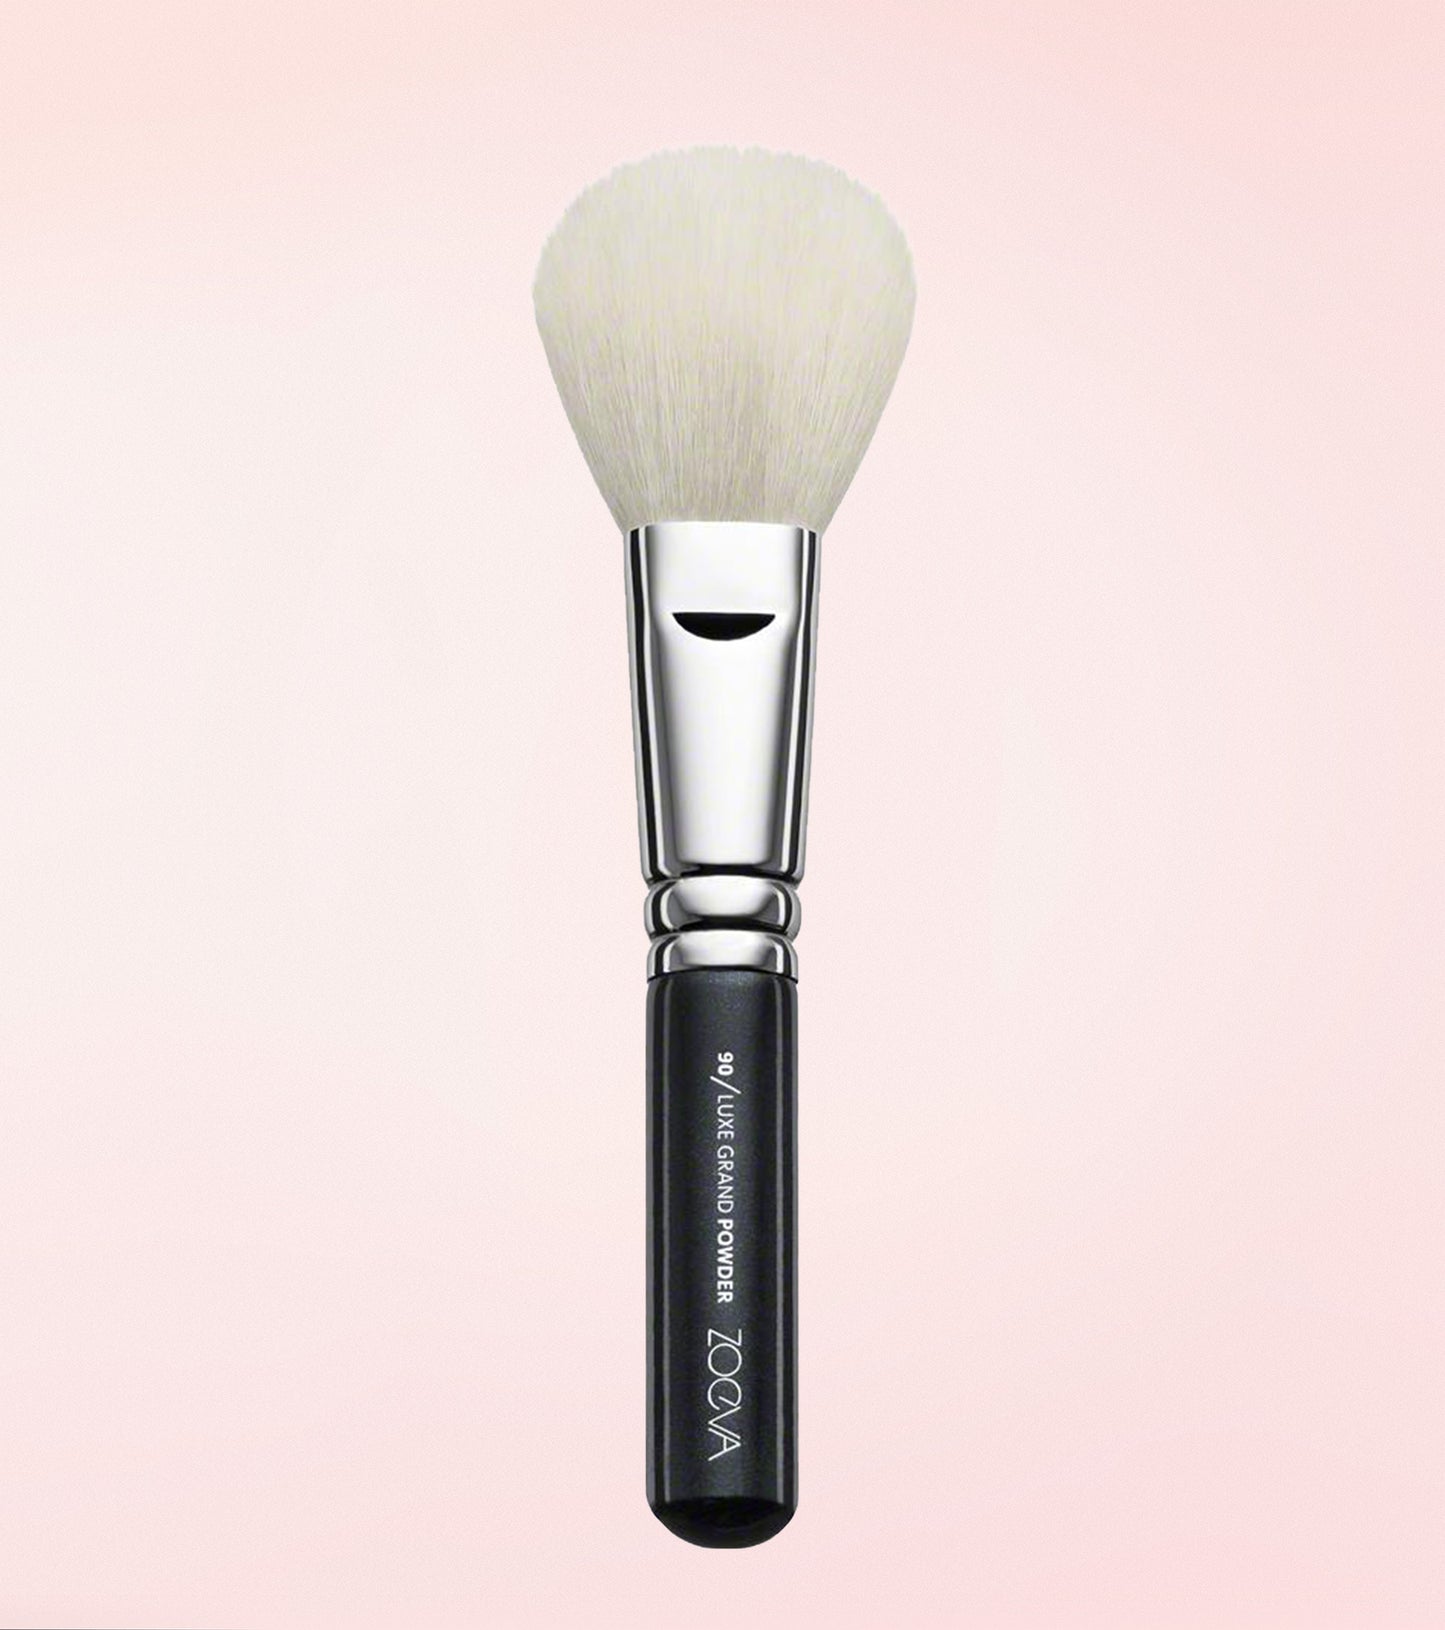 090 Luxe Grand Powder Brush Expanded Image 1